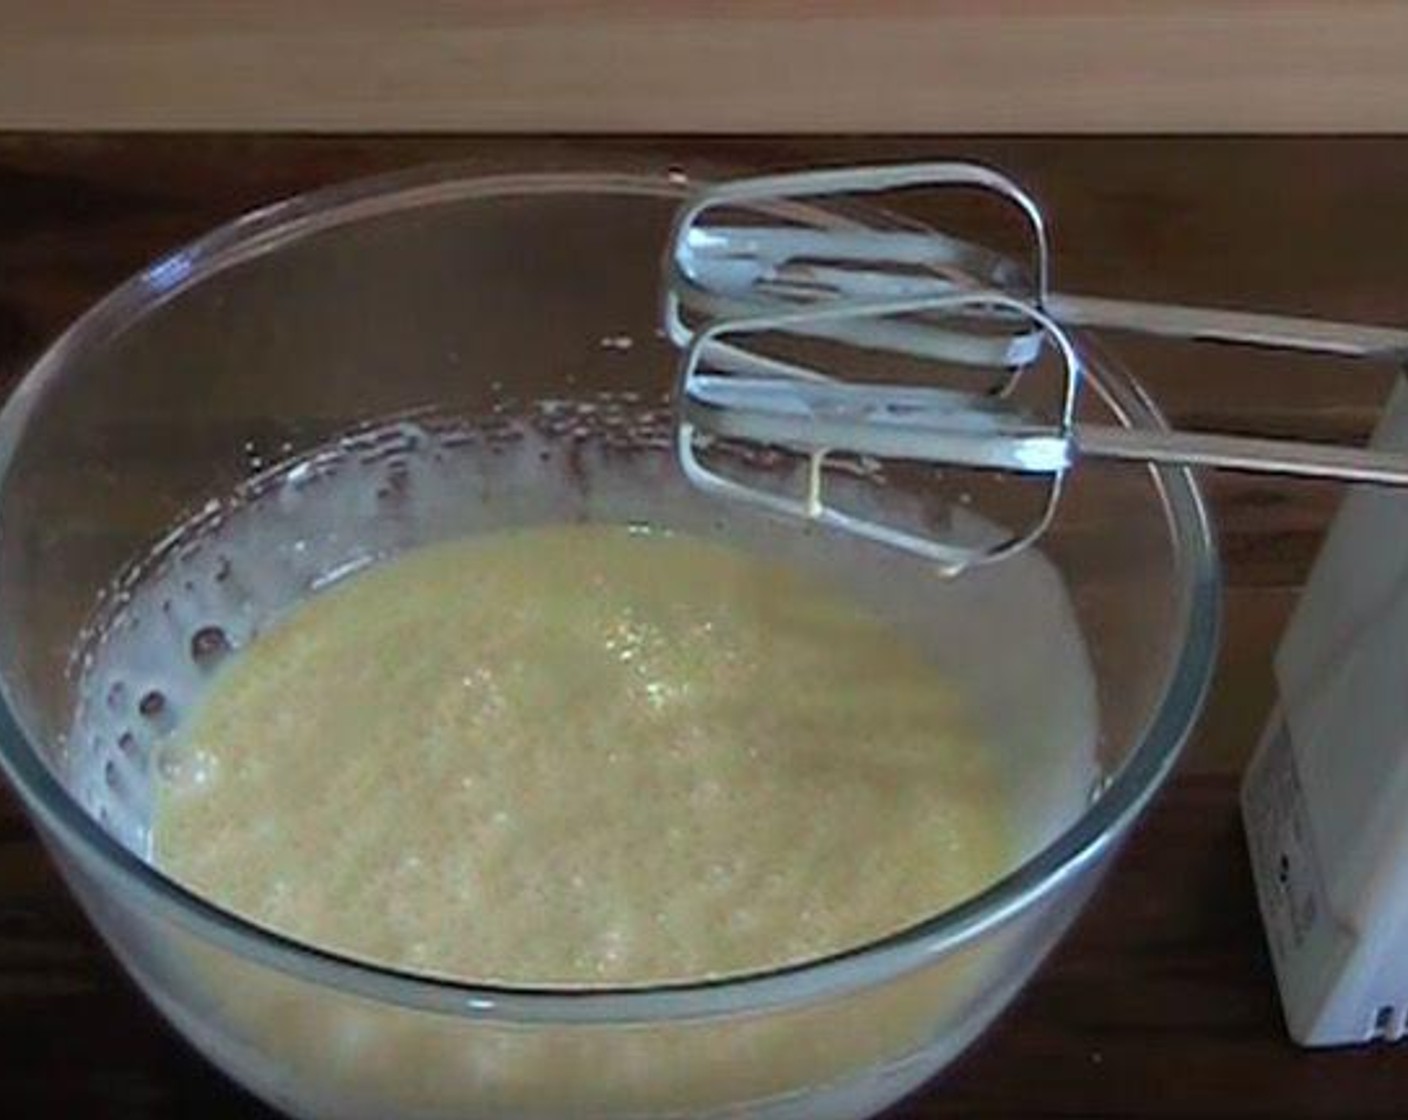 step 5 In a mixing bowl, add Sweetened Condensed Milk (1 1/3 cups) and Egg (1). Beat together until smooth. Add Self-Rising Flour (2 Tbsp) and juice from Lemons (3). Mix again.